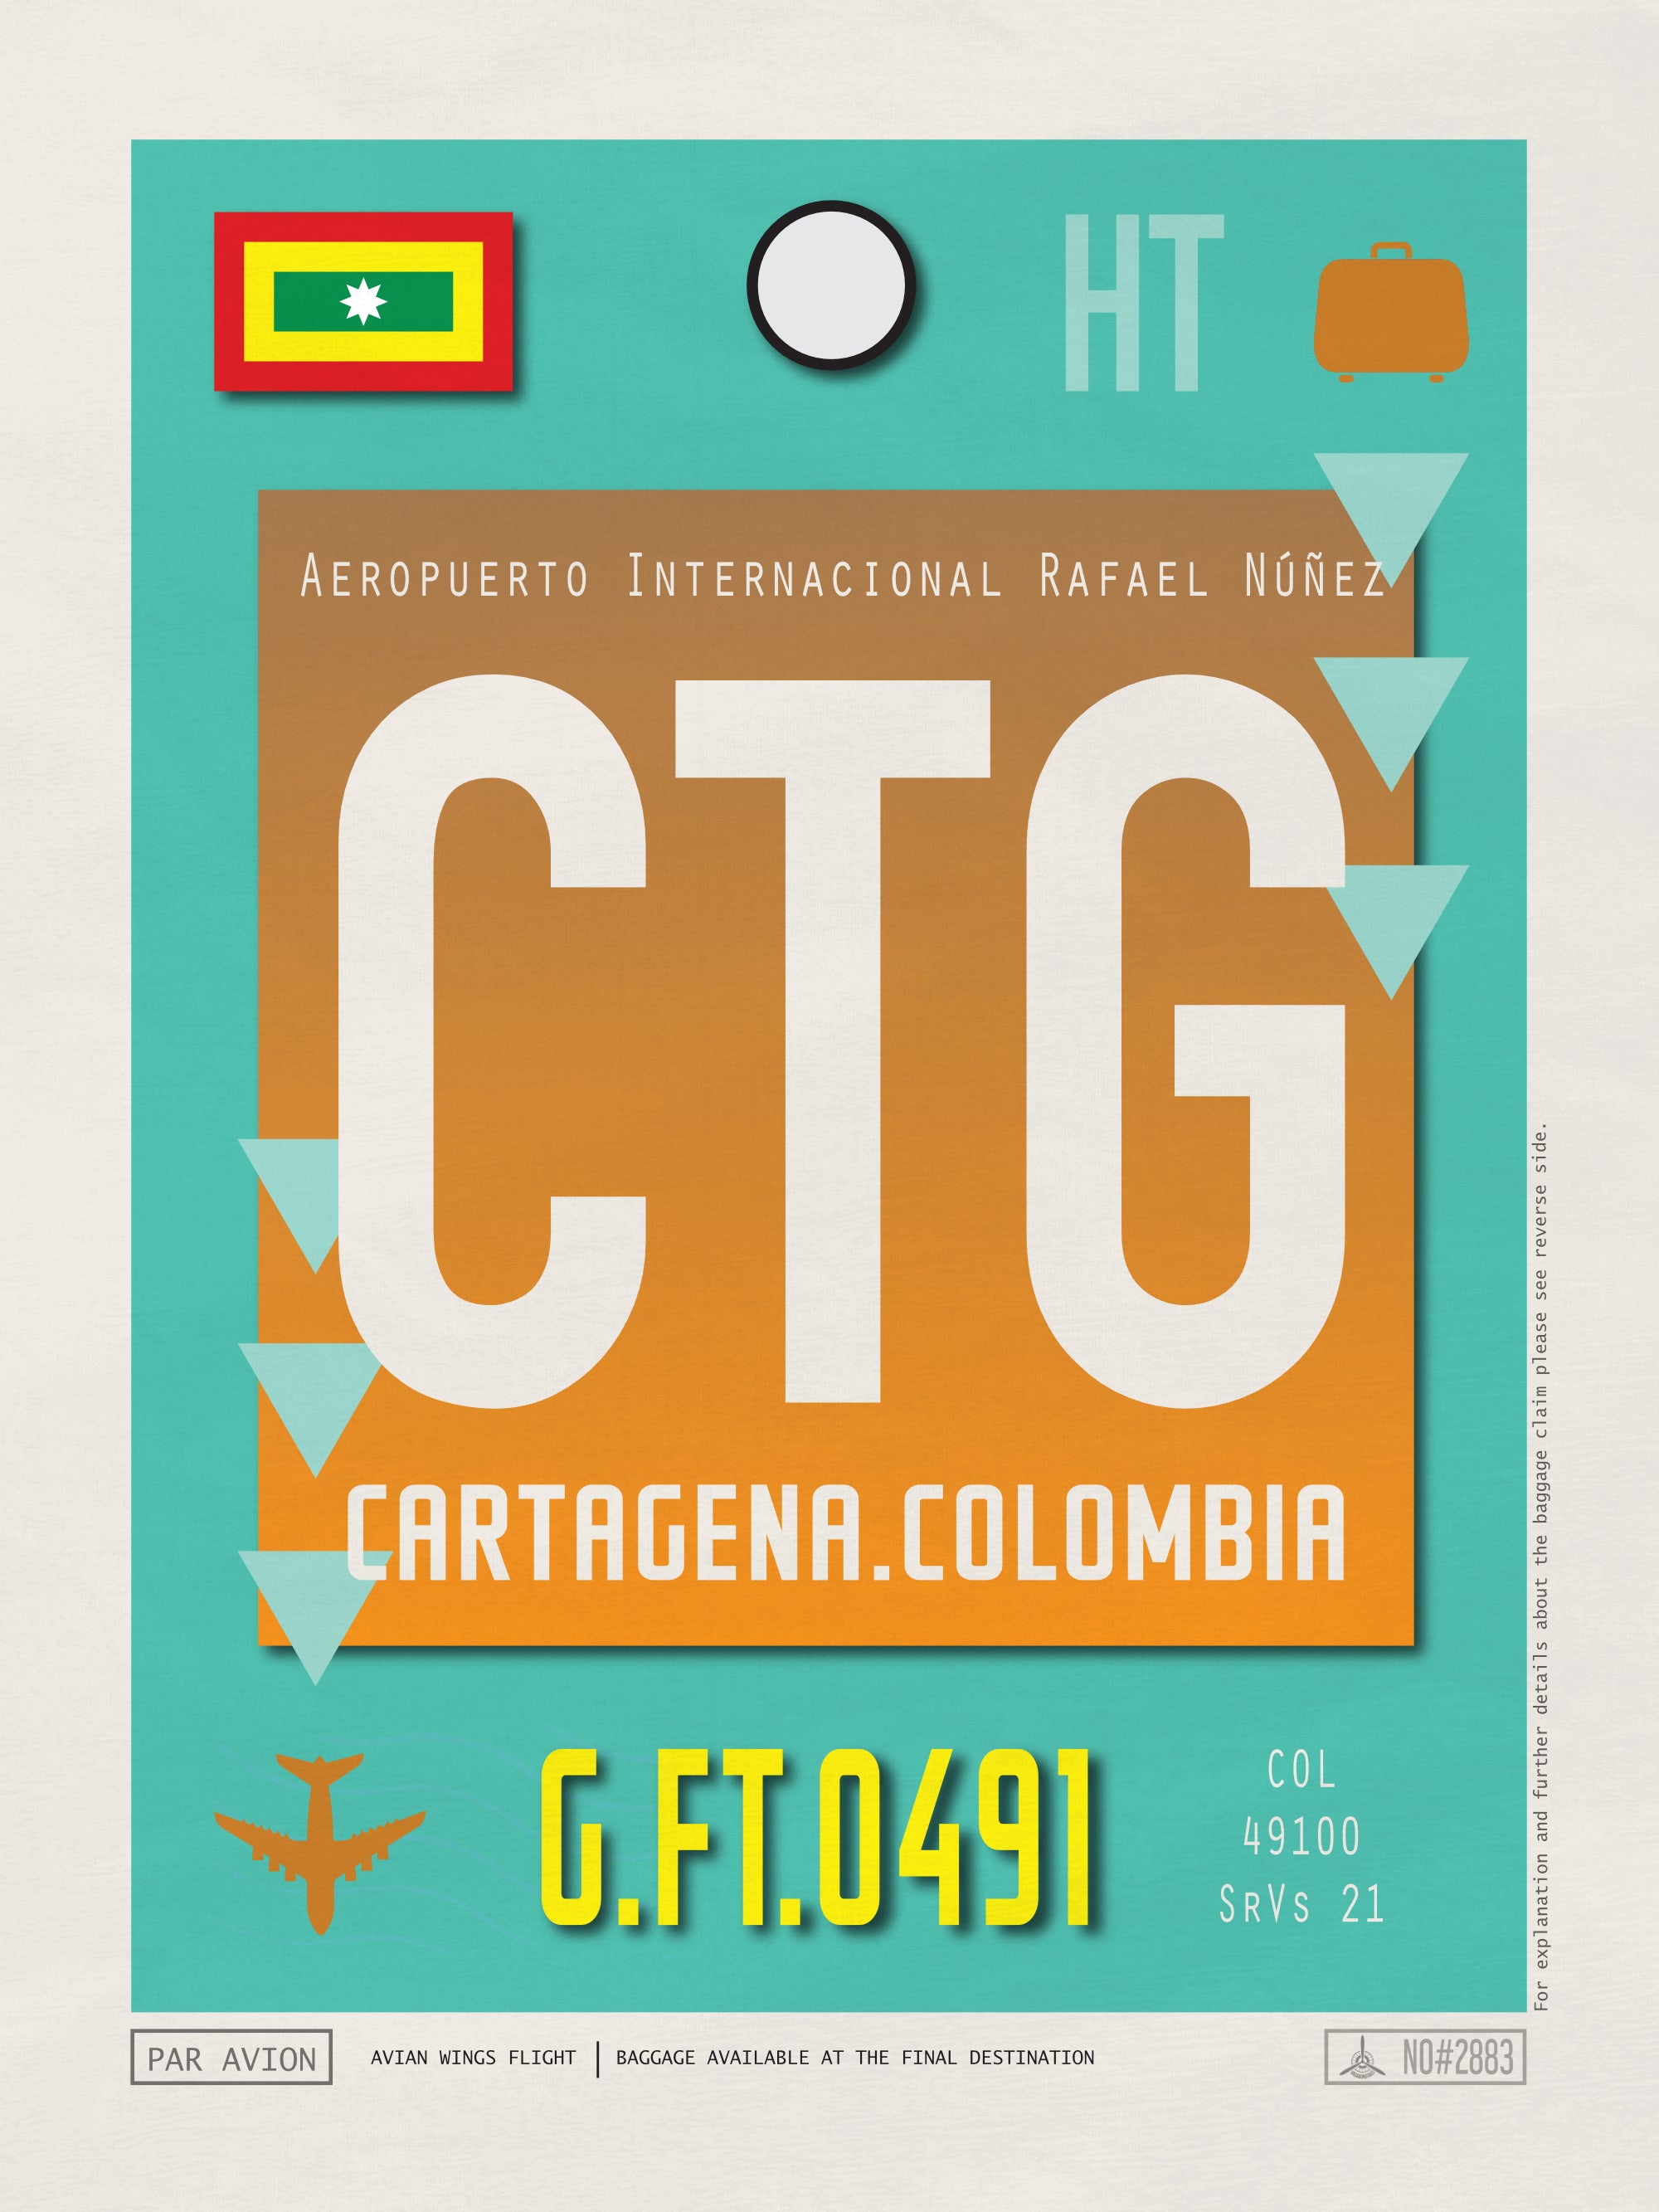 Cartagena, Colombia - CTG Airport Code Poster